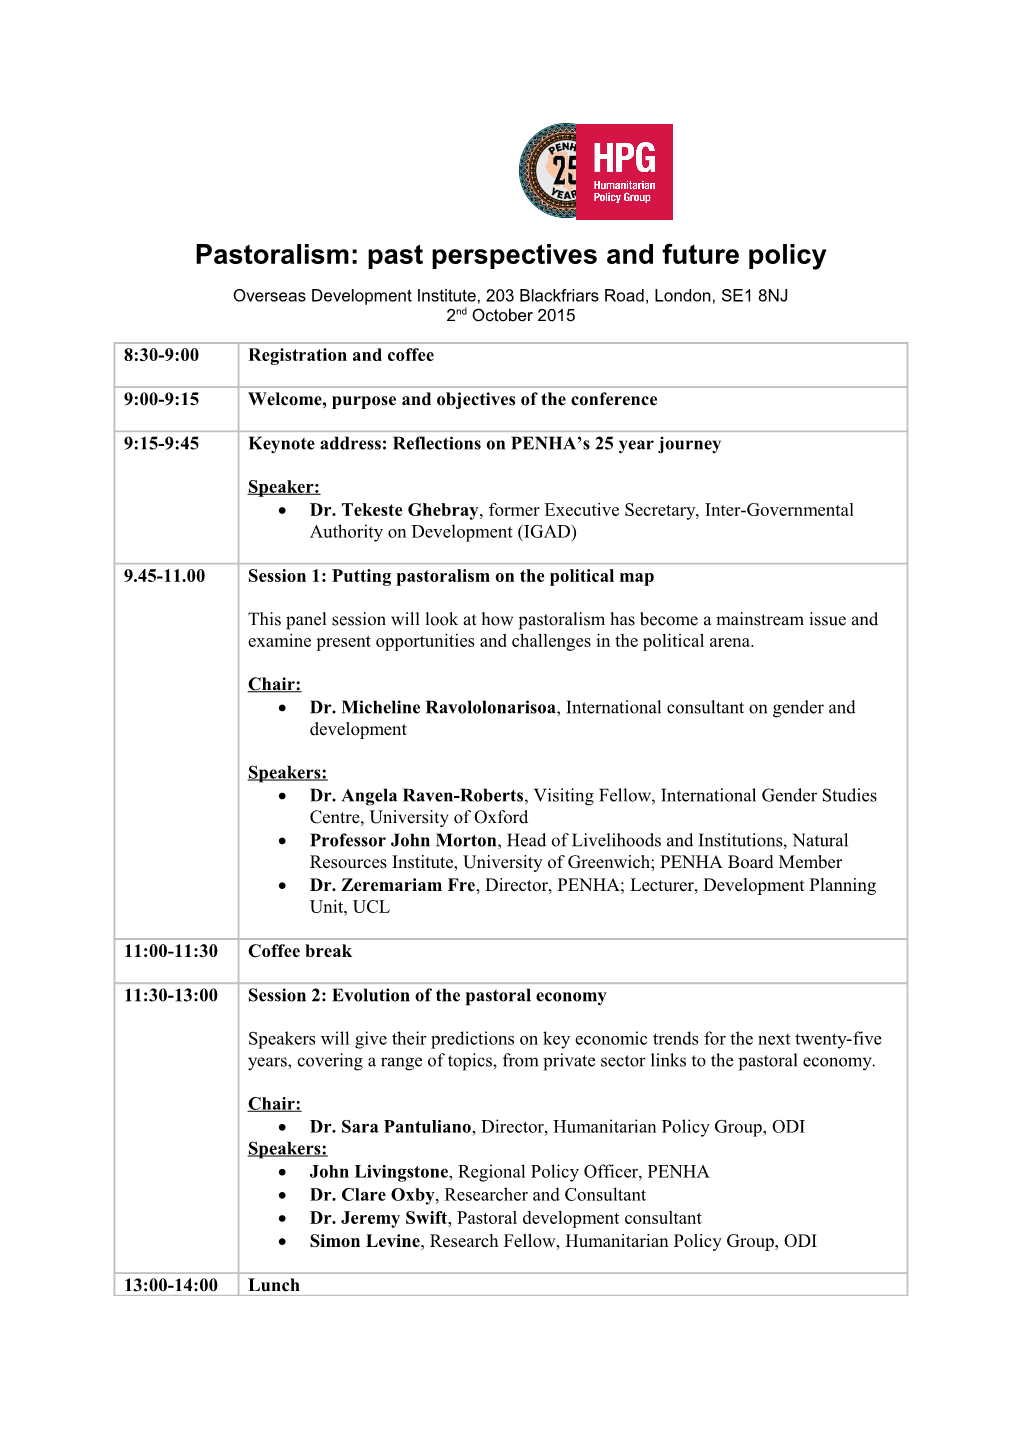 Pastoralism: Past Perspectives and Future Policy